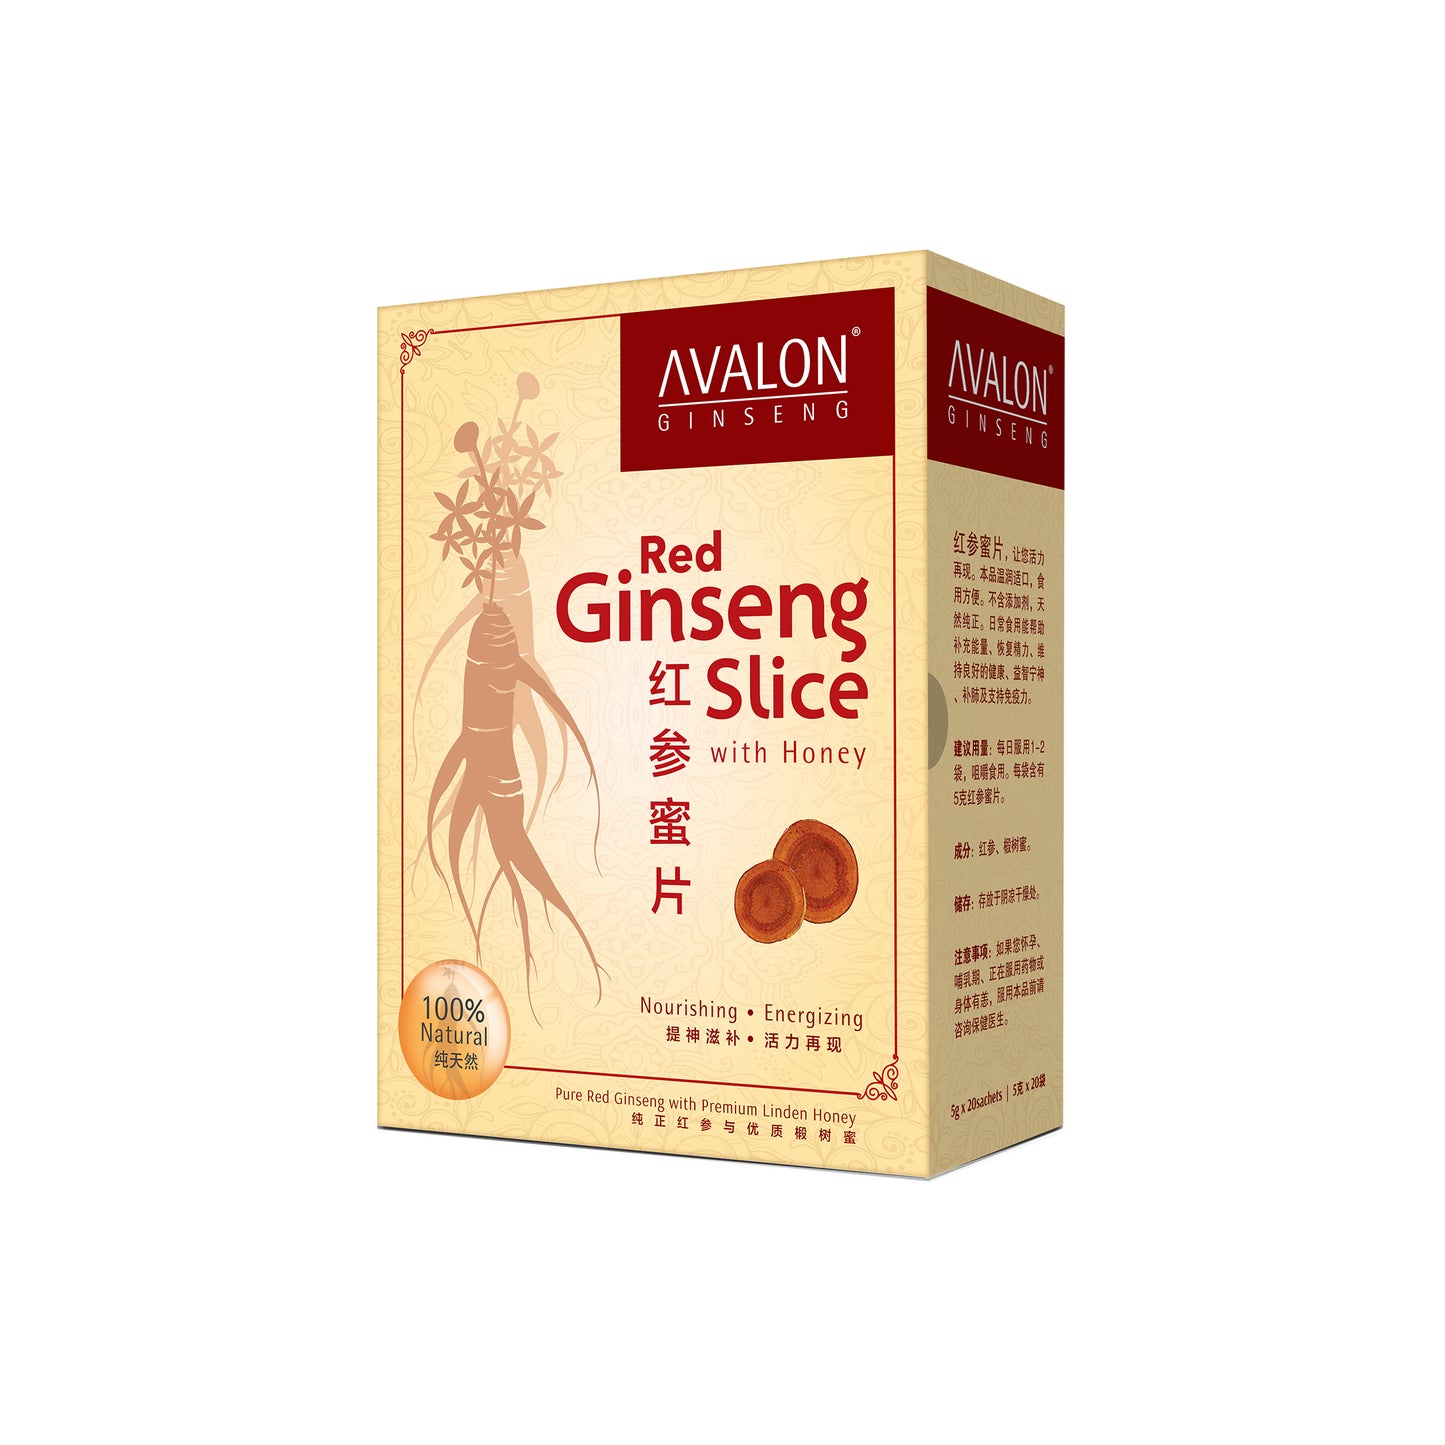 AVALON® Red Ginseng Slice with Honey